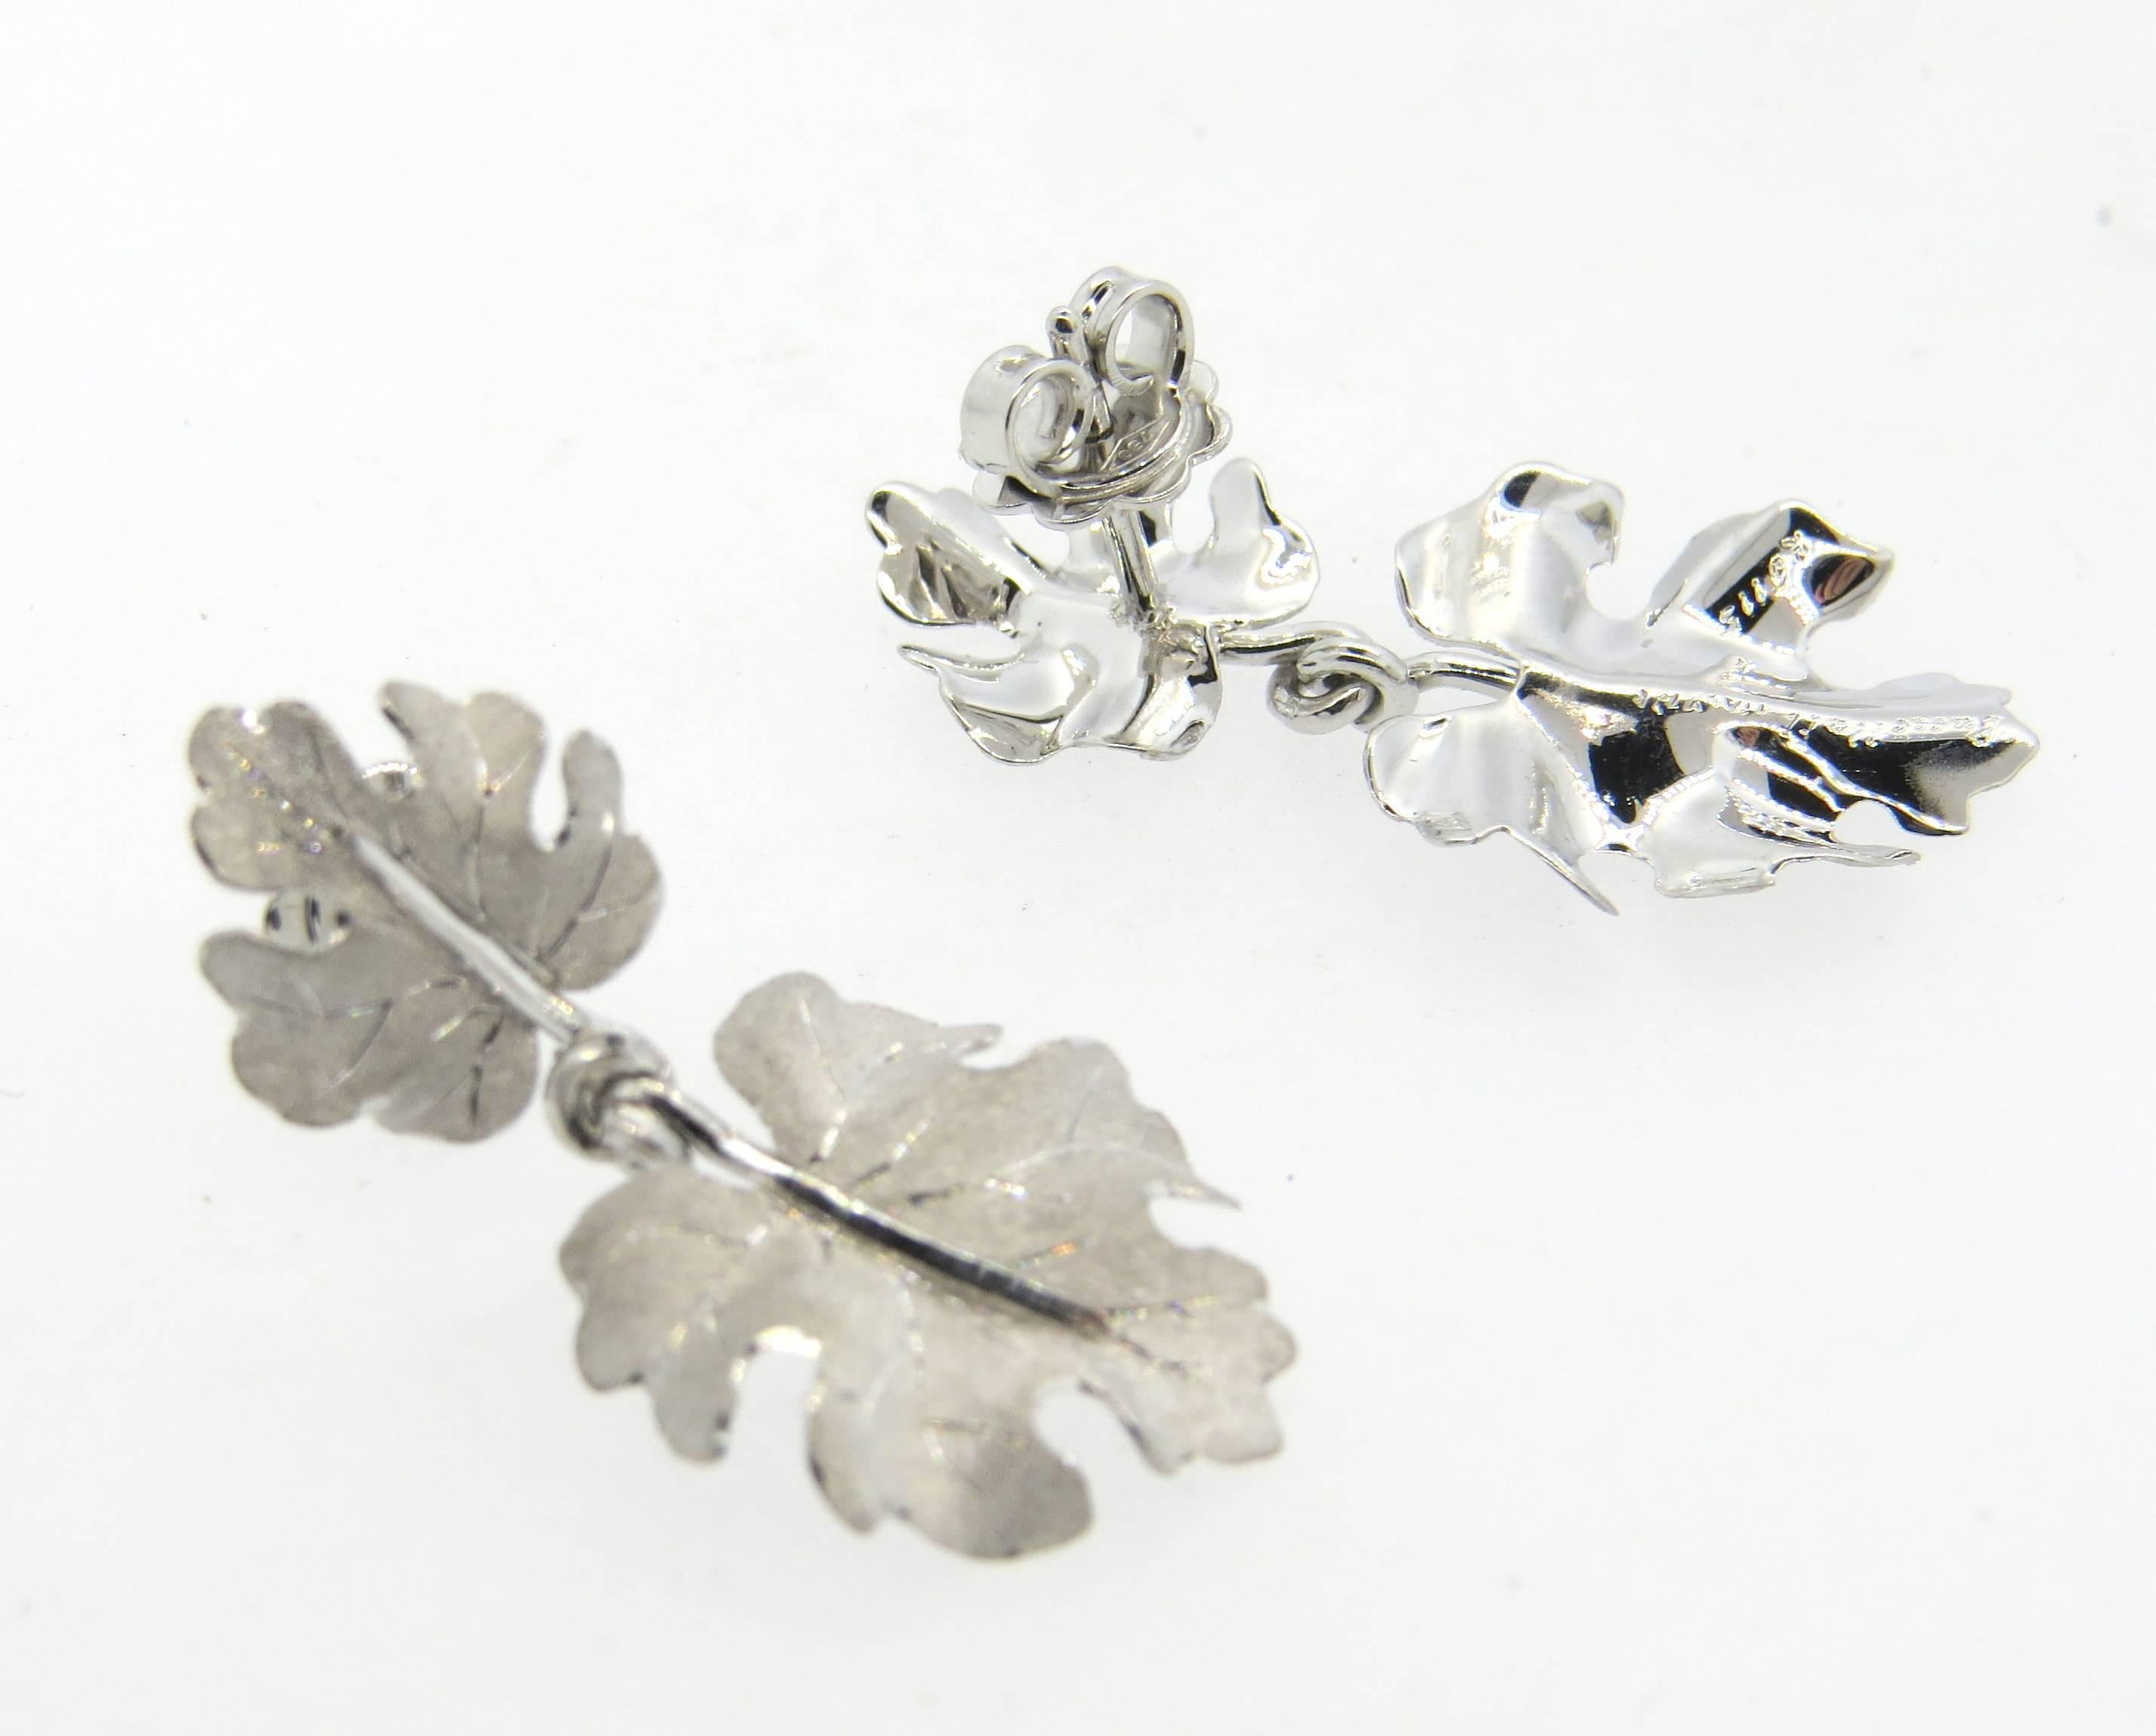 Pair of 18k white gold earrings, crafted by Buccellati, featuring leaf motif. Earrings are 30mm x 16mm. Marked: Buccellati, Italy 18k. Weight - 4.7 grams
Come with original Buccellati paperwork